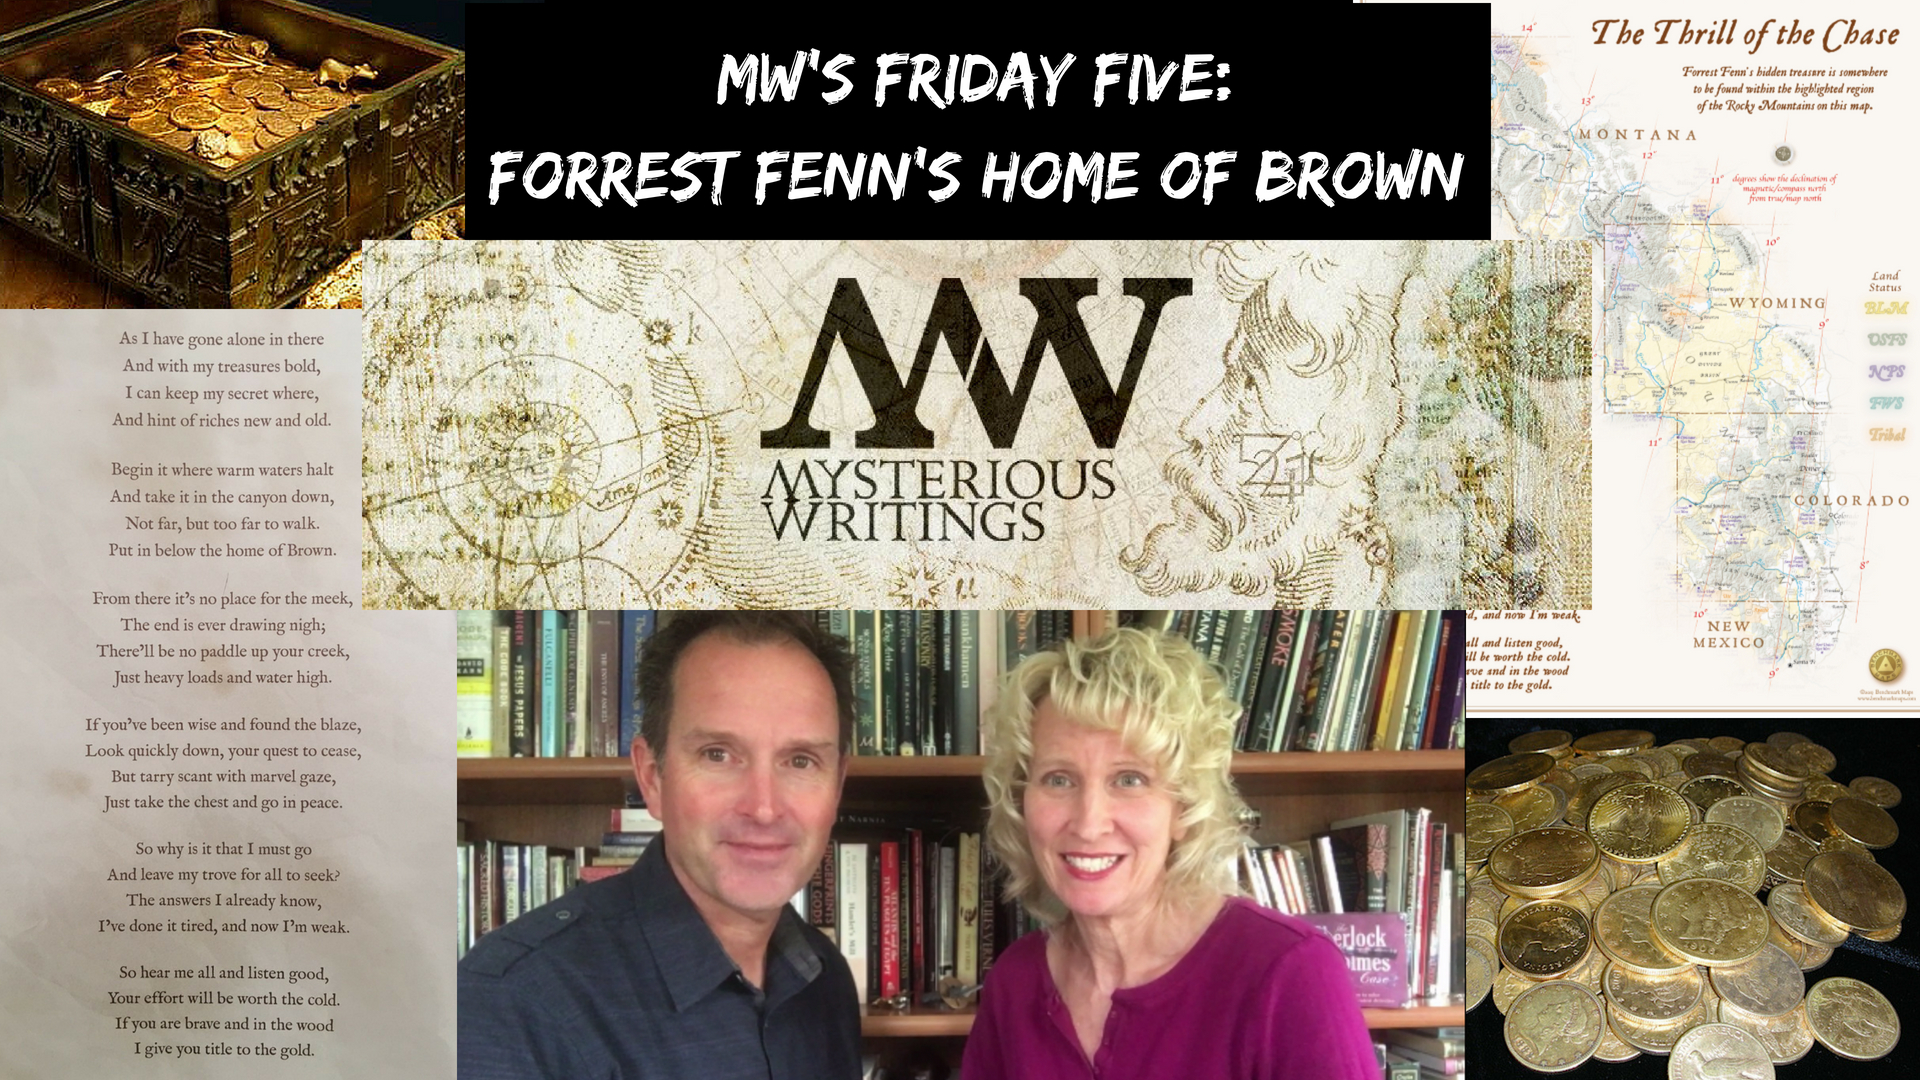 MW’s Friday Five: Forrest Fenn’s Home of Brown